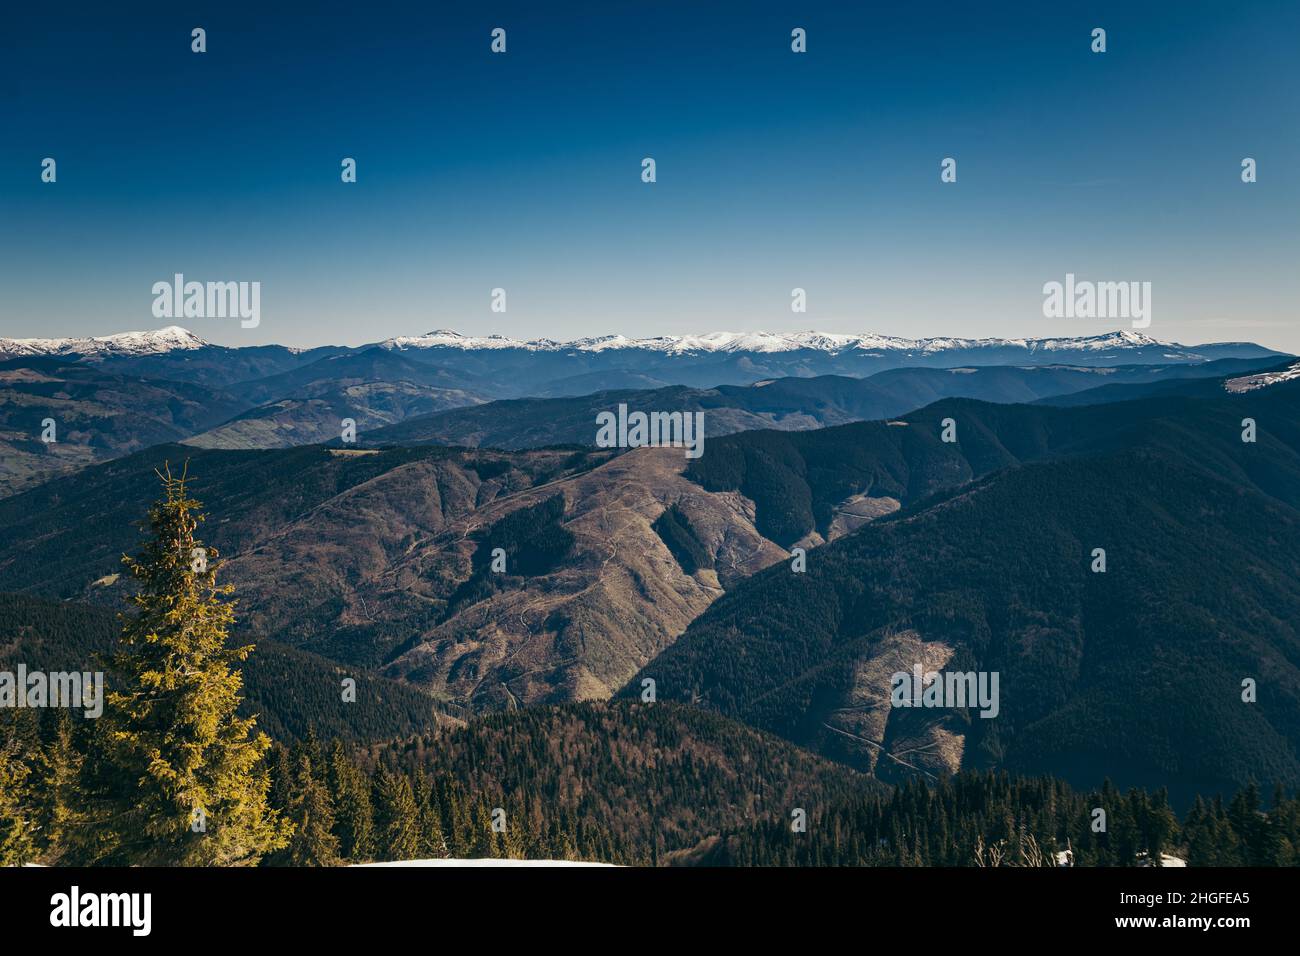 Landscape of snow-capped peaks, late winter early spring Stock Photo